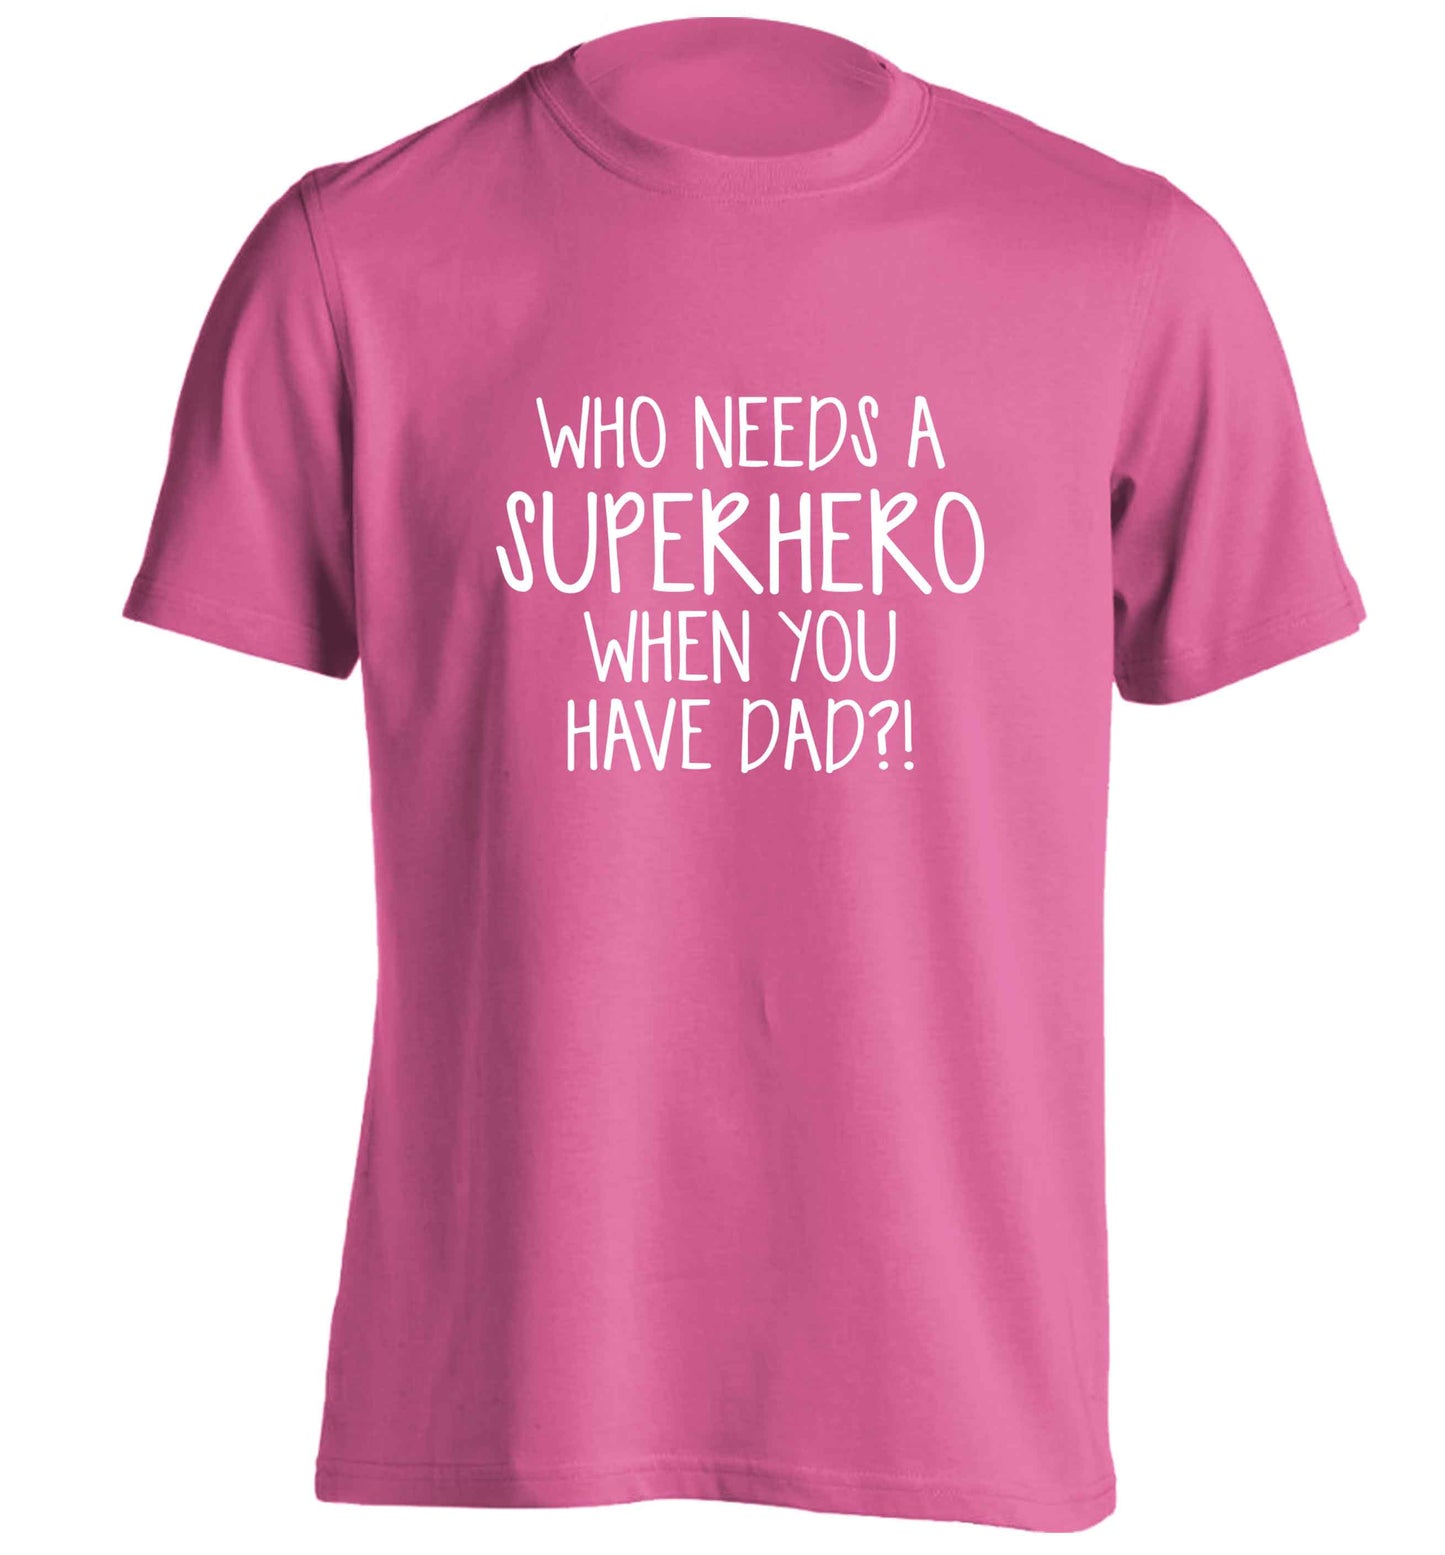 Who needs a superhero when you have dad! adults unisex pink Tshirt 2XL